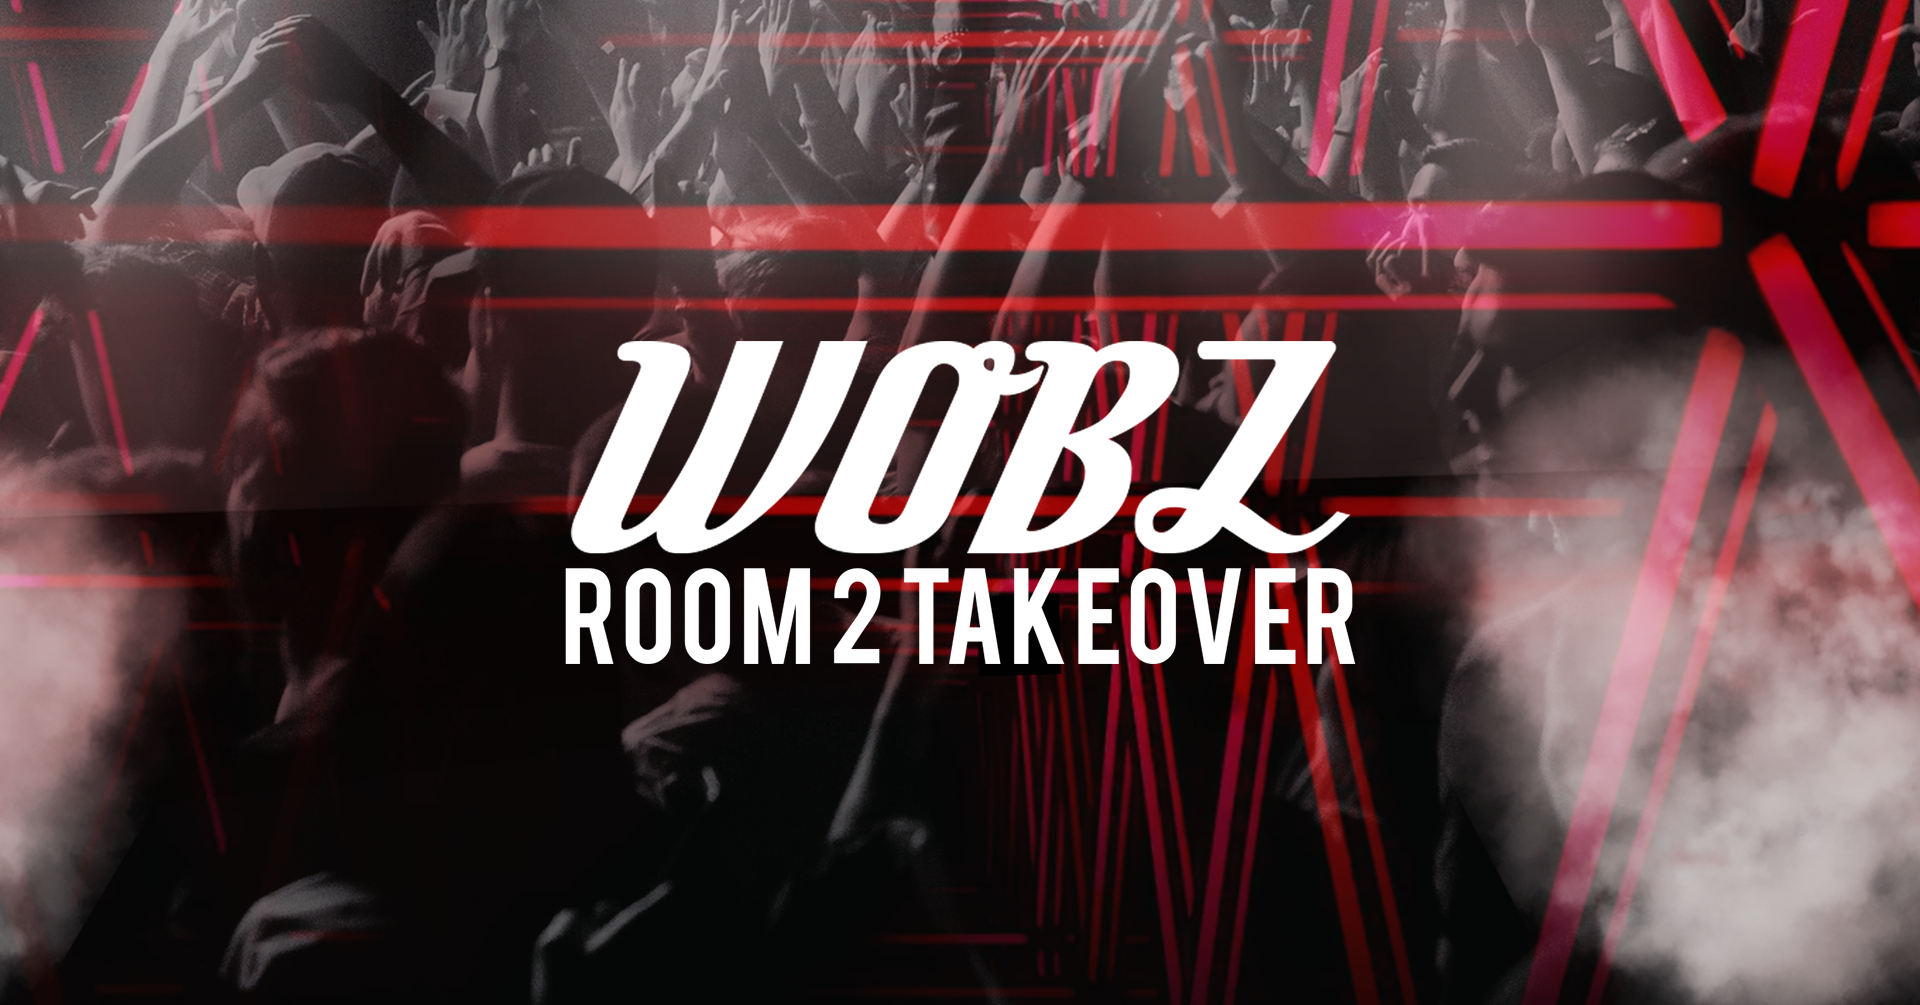 WOBZ [Room 2 Takeover] – Saturday 27th July